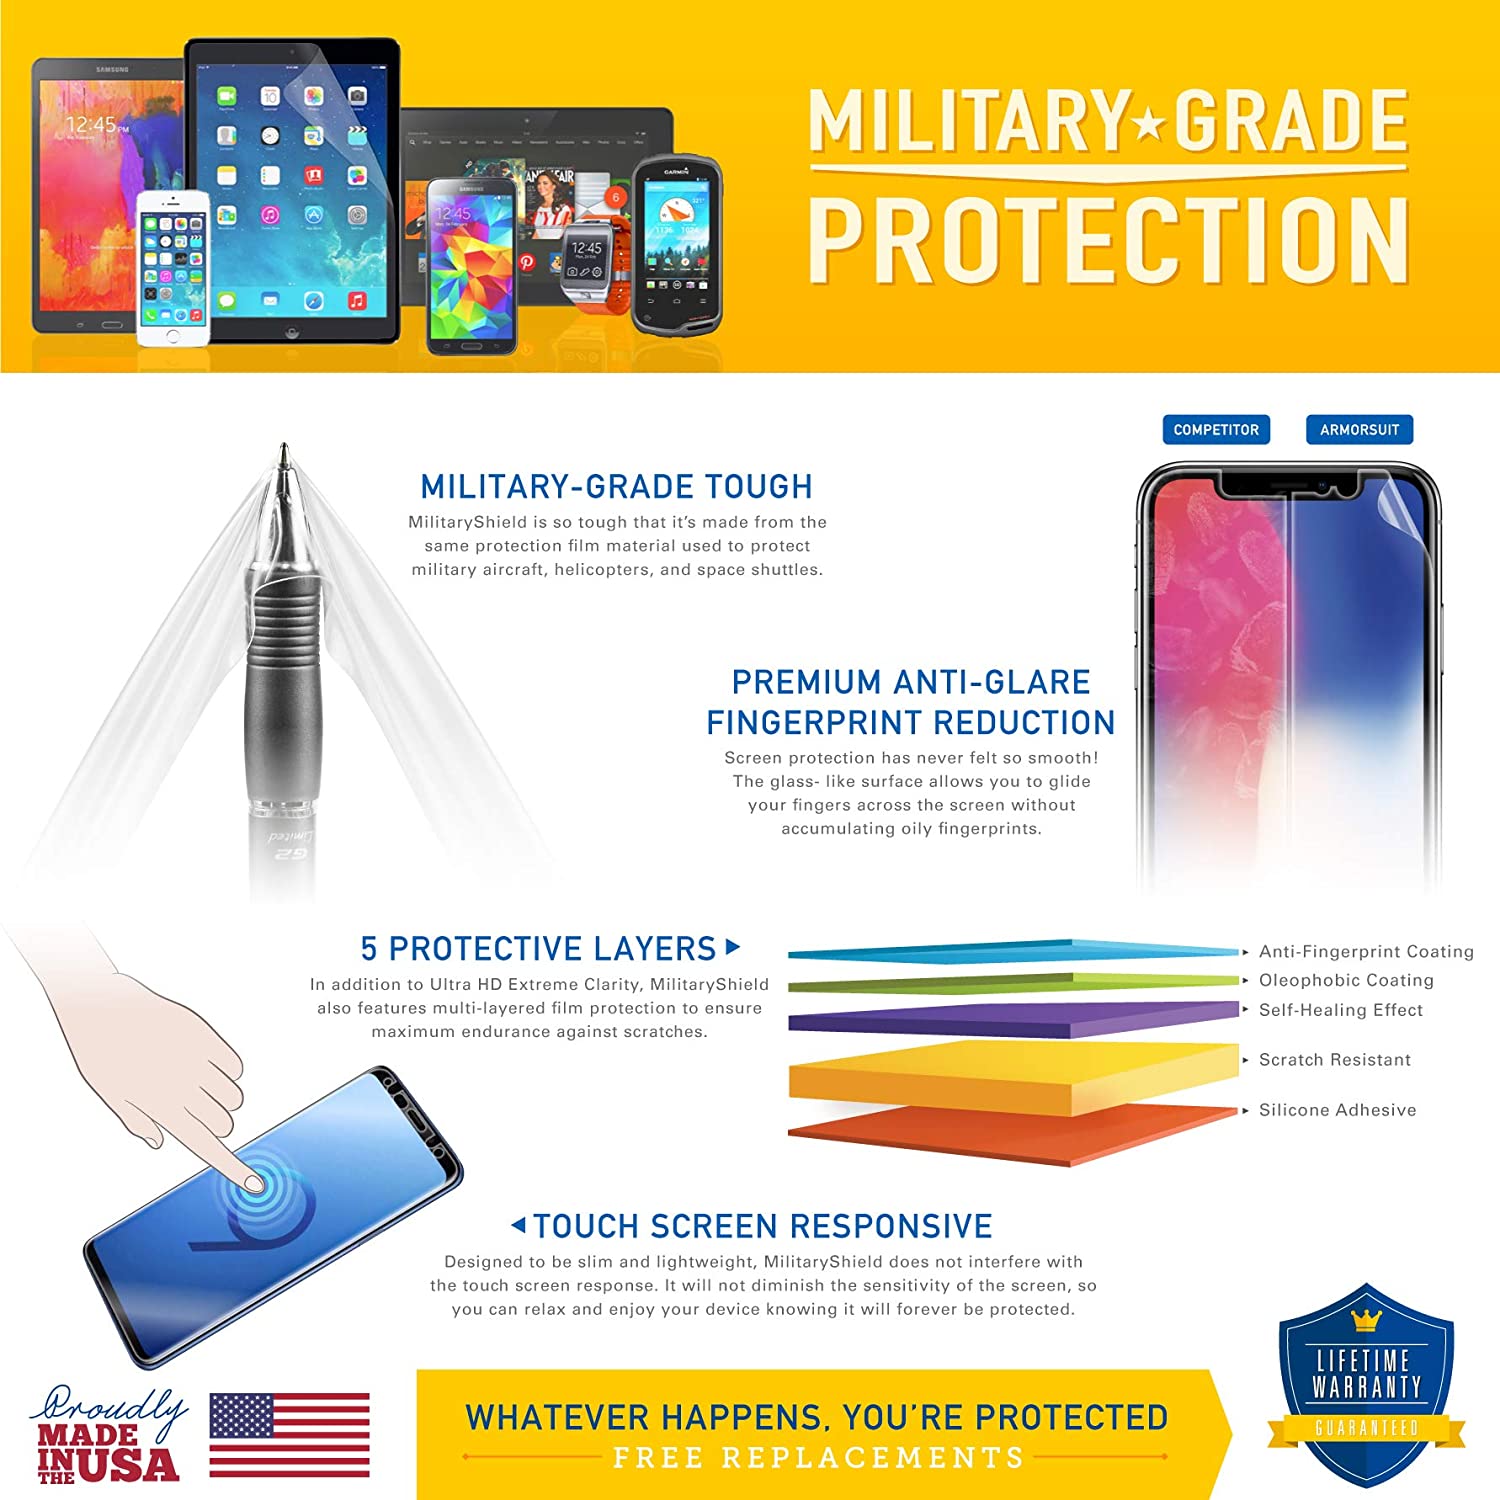 [2-Pack] Samsung Galaxy A5 Screen Protector